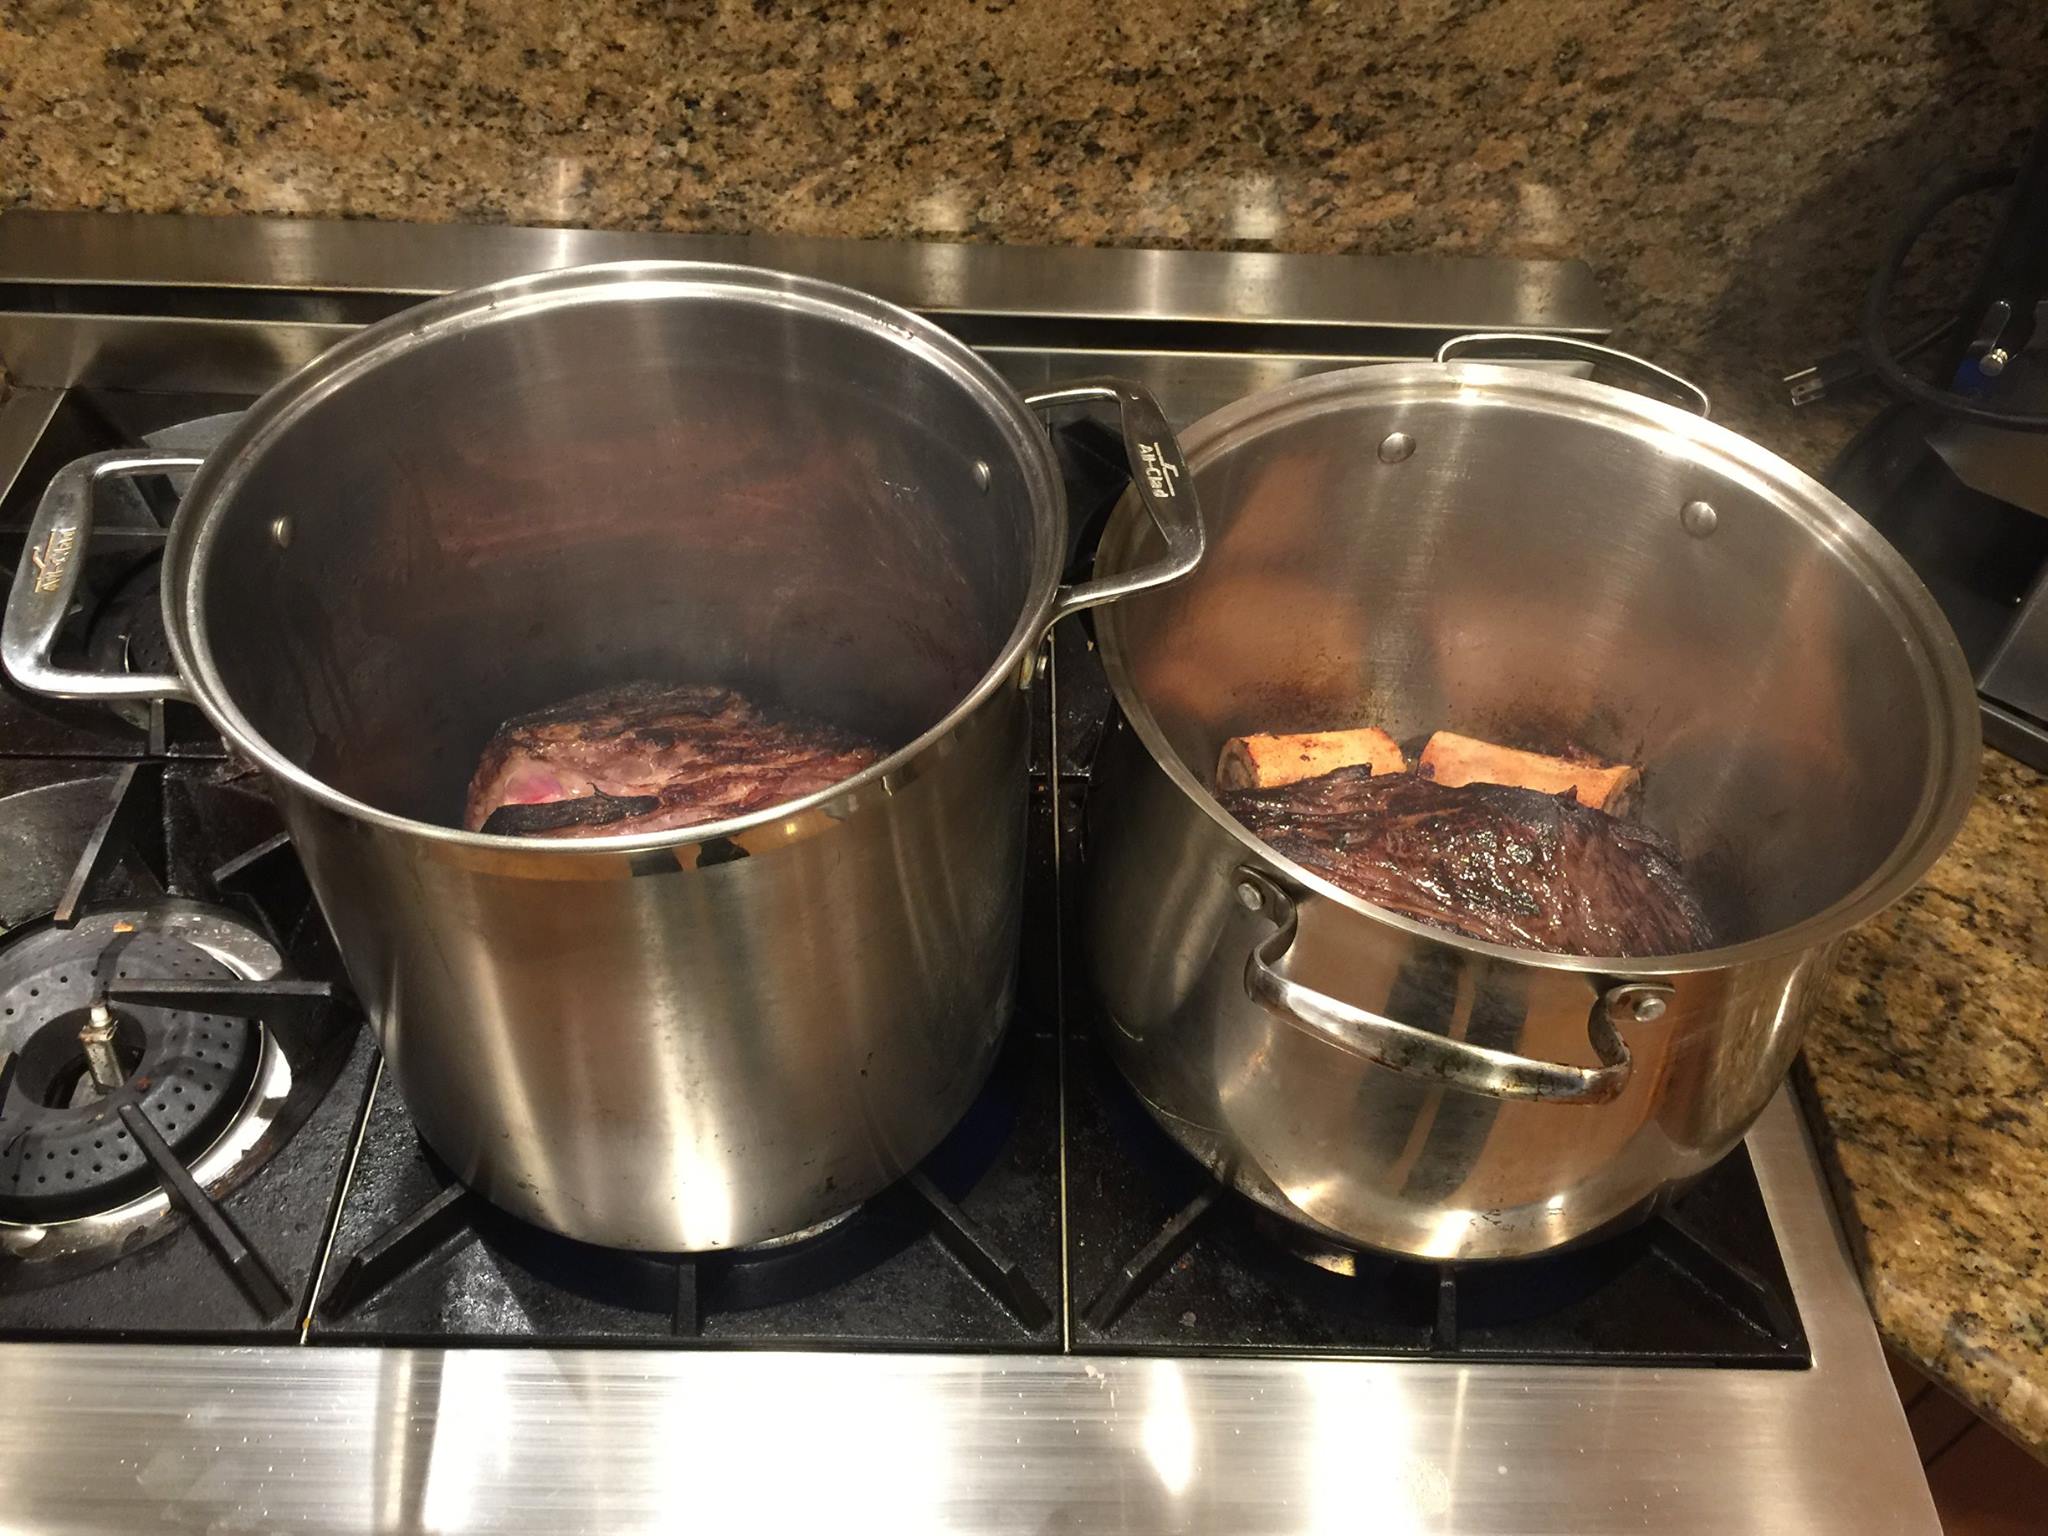 20 pounds of sauerbraten in the making (part 2)